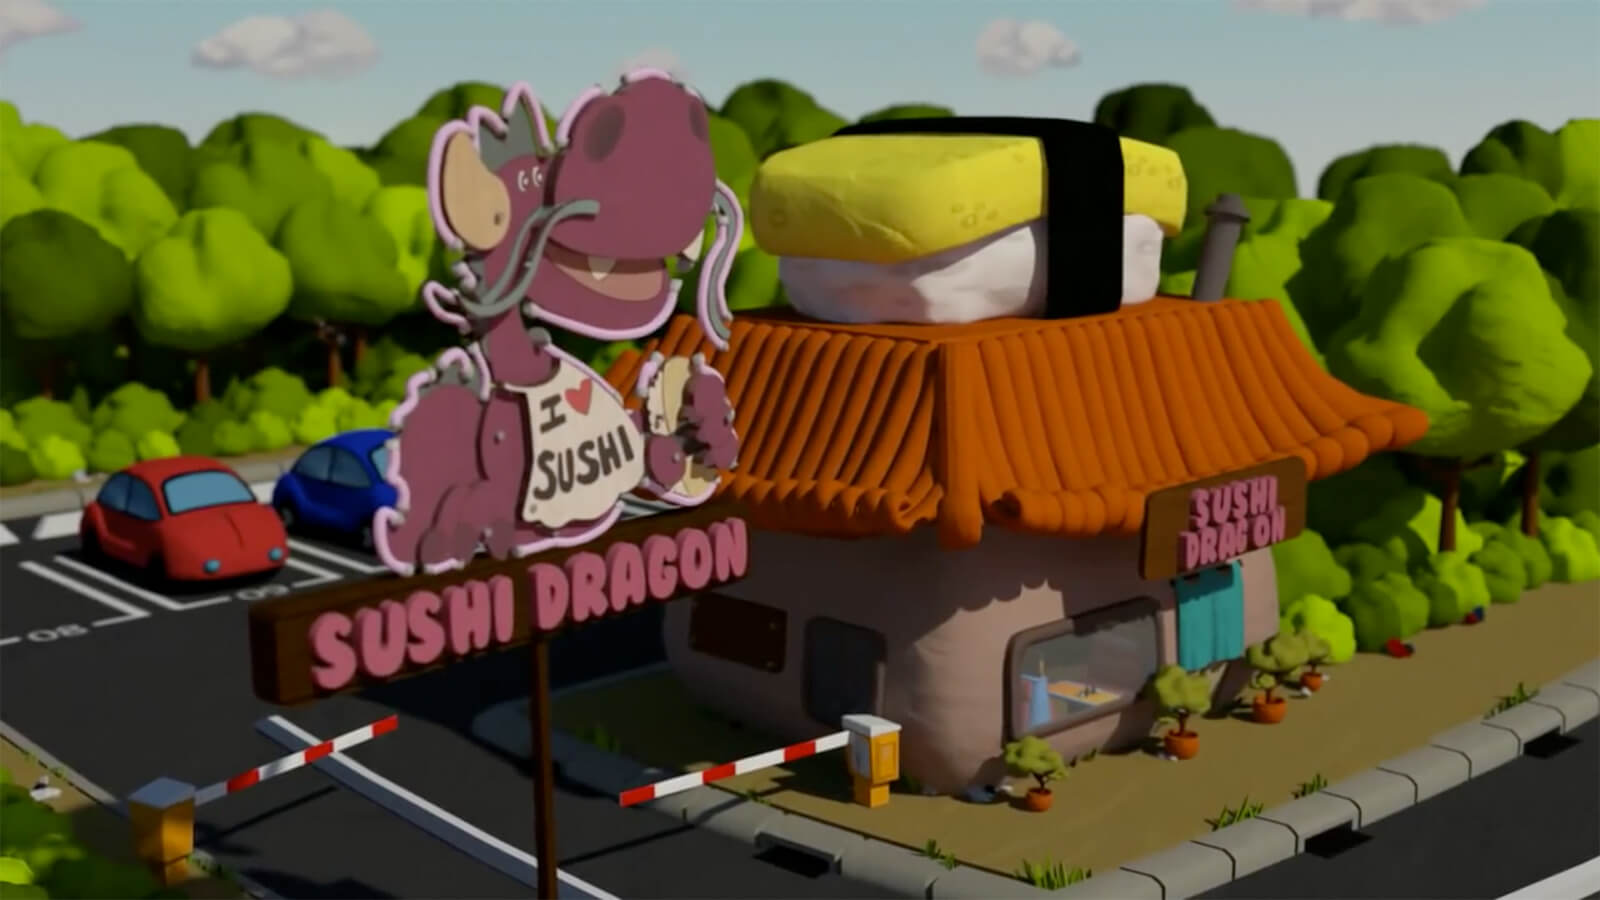 Exterior shot of a colorful, computer generated sushi restaurant with a maroon dragon sign reading "Sushi Dragon."